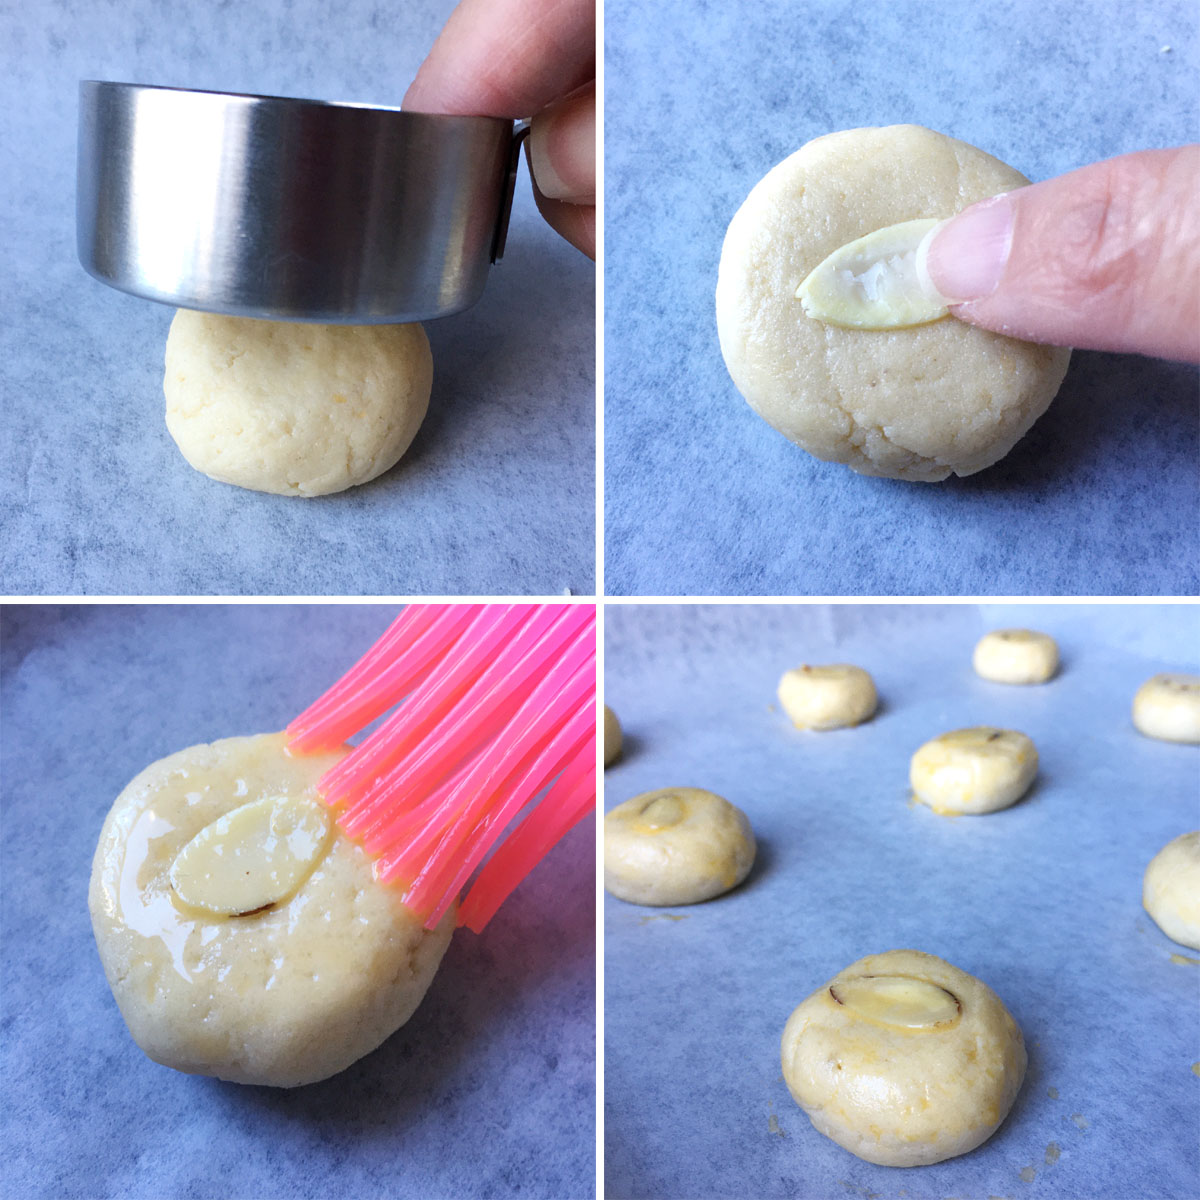 Flattening a round dough ball, placing a sliced almond on top, and brushing it with yellow egg wash.